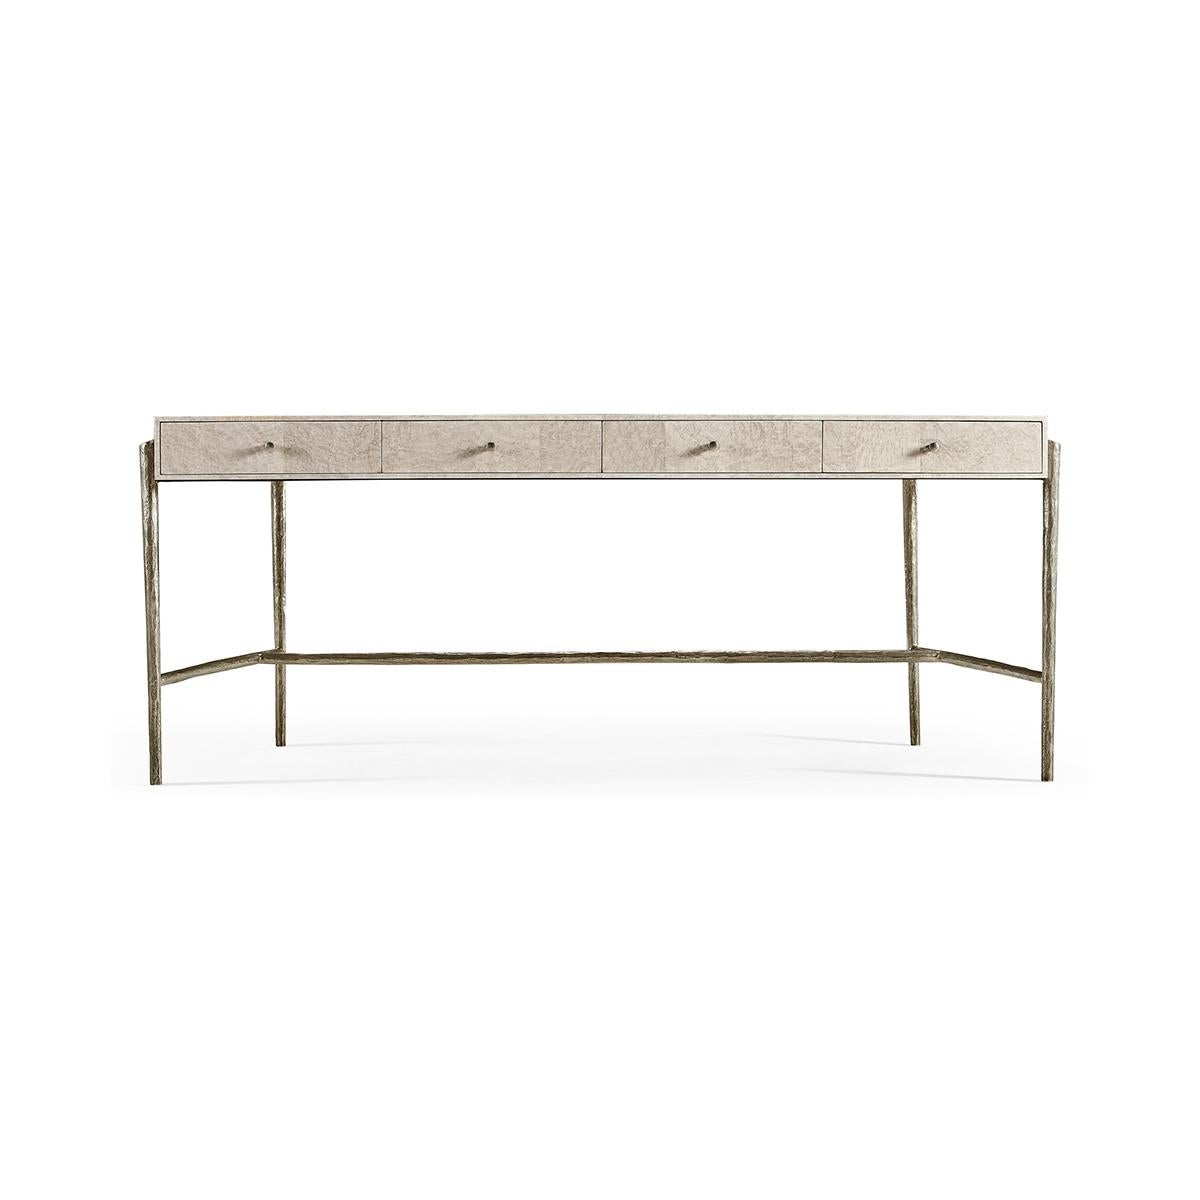 Organic modern madrona desk, Inspirational design elements lead with a mesmerizing butcher block top honed from Madrona burl finished in smoke gray.

Organically textured stainless steel straight-line legs finished in satin white brass offer